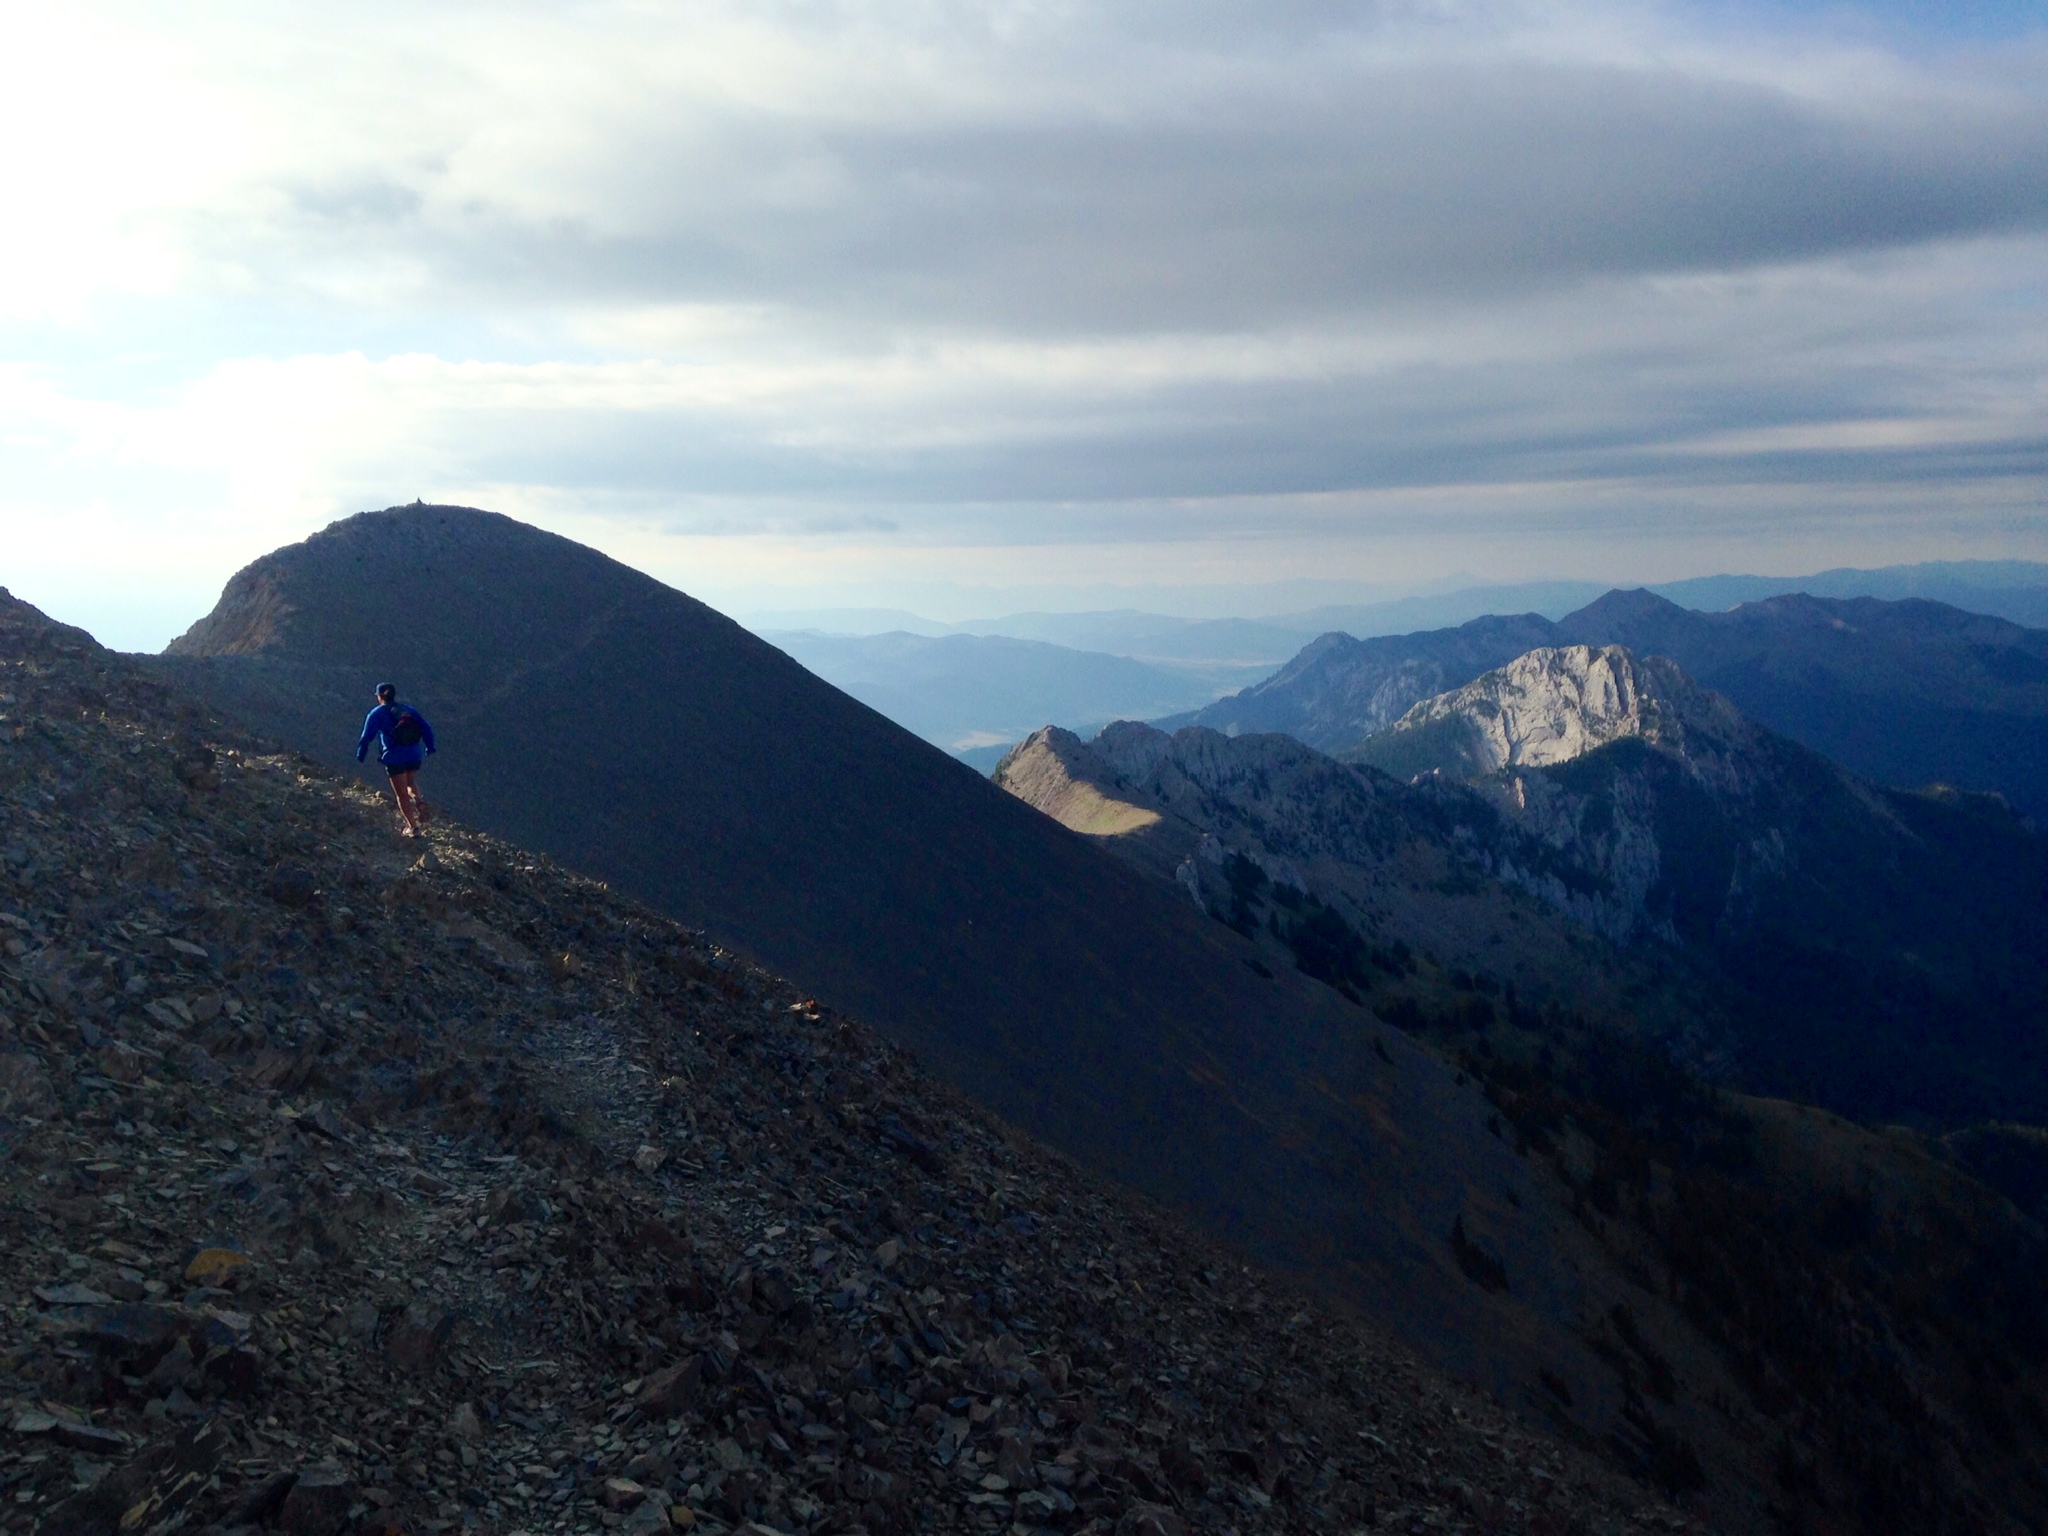 The course of the Bridger Ridge Run looms ahead from the top of Sacajawea Peak in Bozeman, Mont. The Ridge Run is a 20-mile race that traverses the Bridger Range. The race attracts runners from across the country and many from the nordic ski community participate each year. 